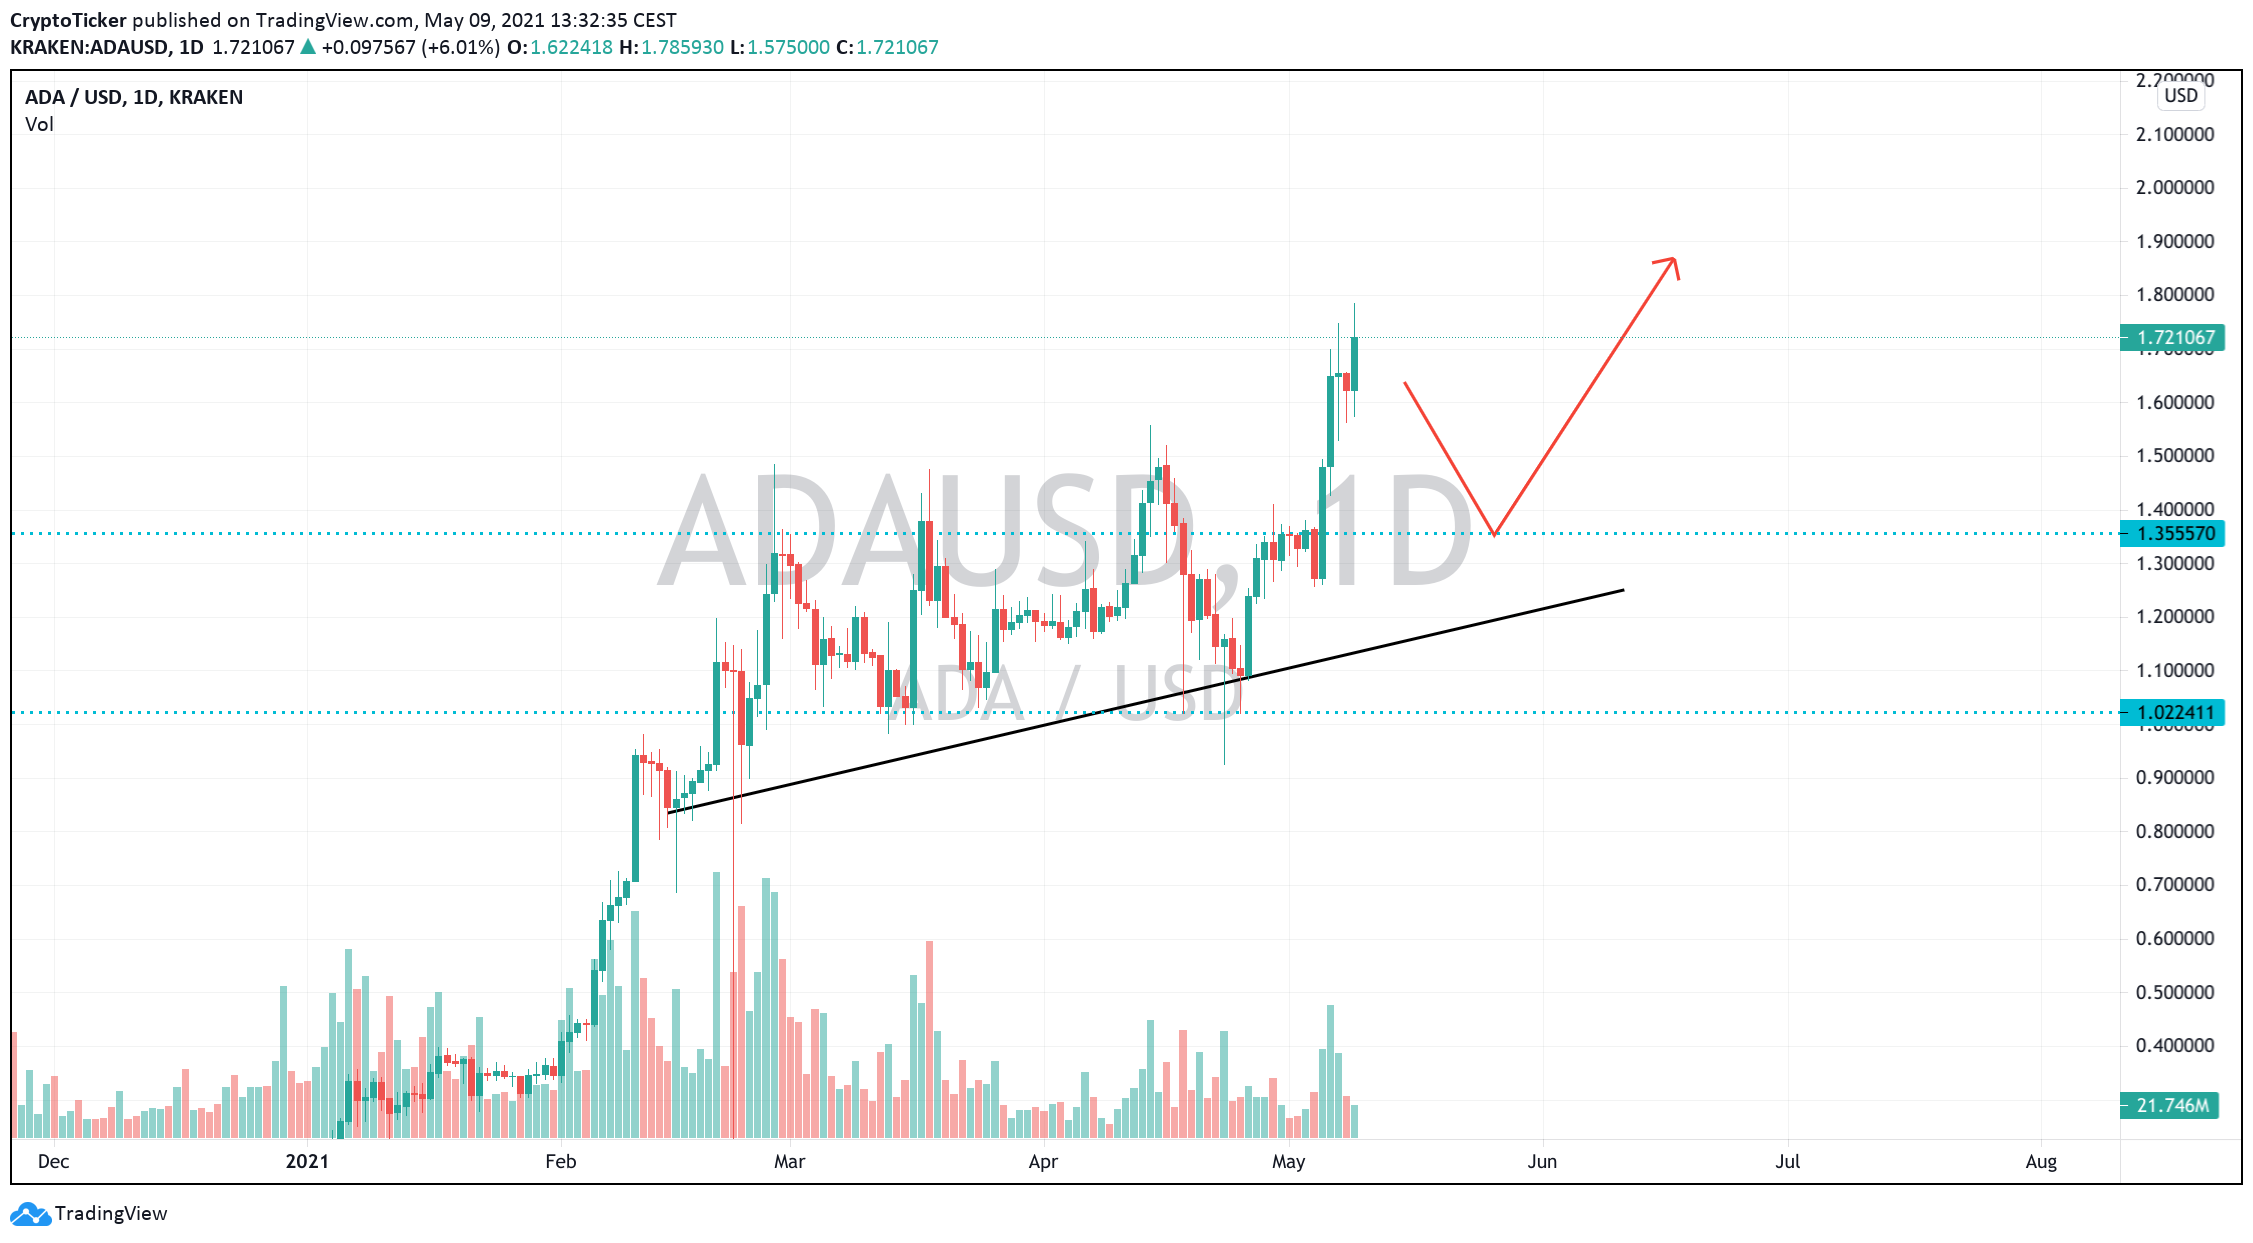 ADA/USD 1-day chart showing ADA's potential correction